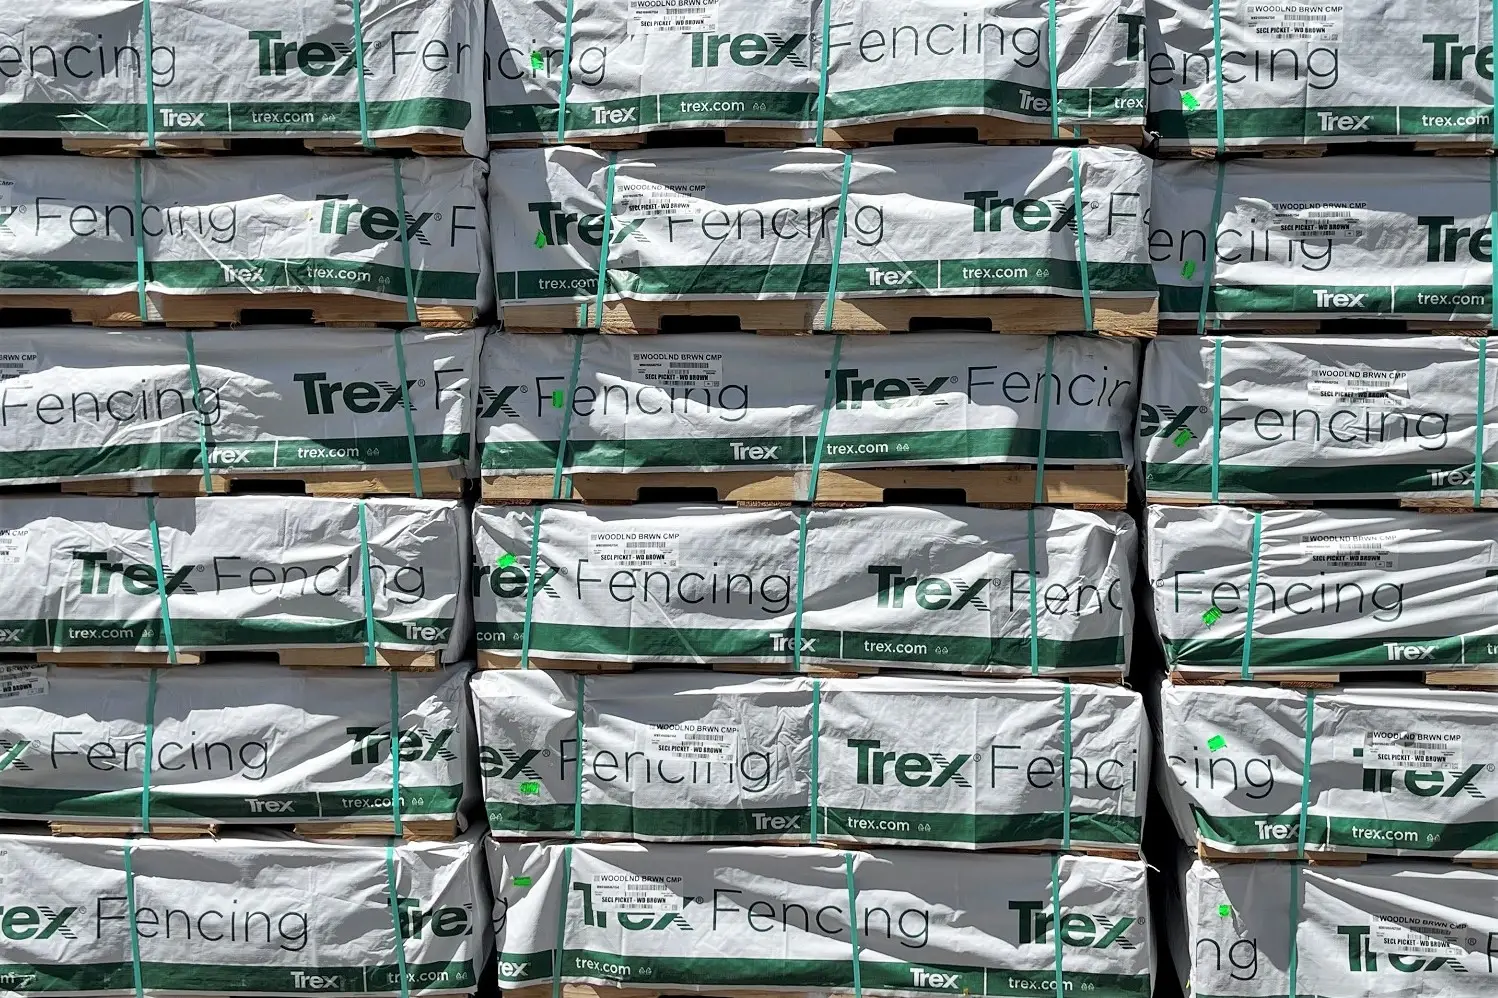 Stacks of Trex Fencing materials